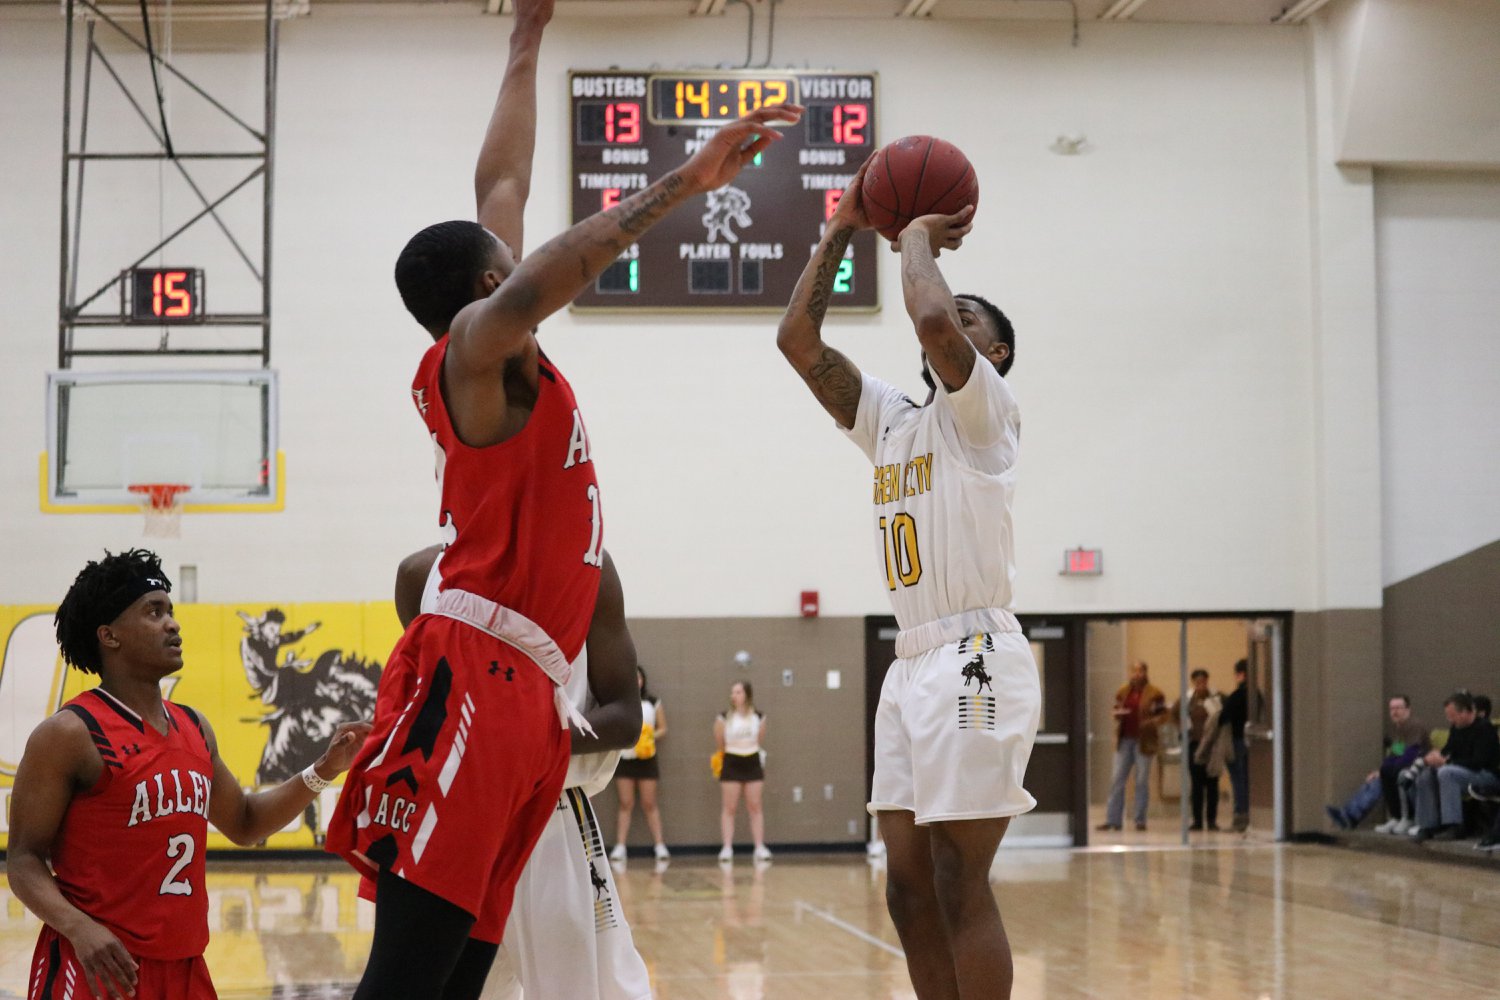 Heading to Wichita; Broncbusters take down red-hot Allen to advance to Region VI Quarterfinals